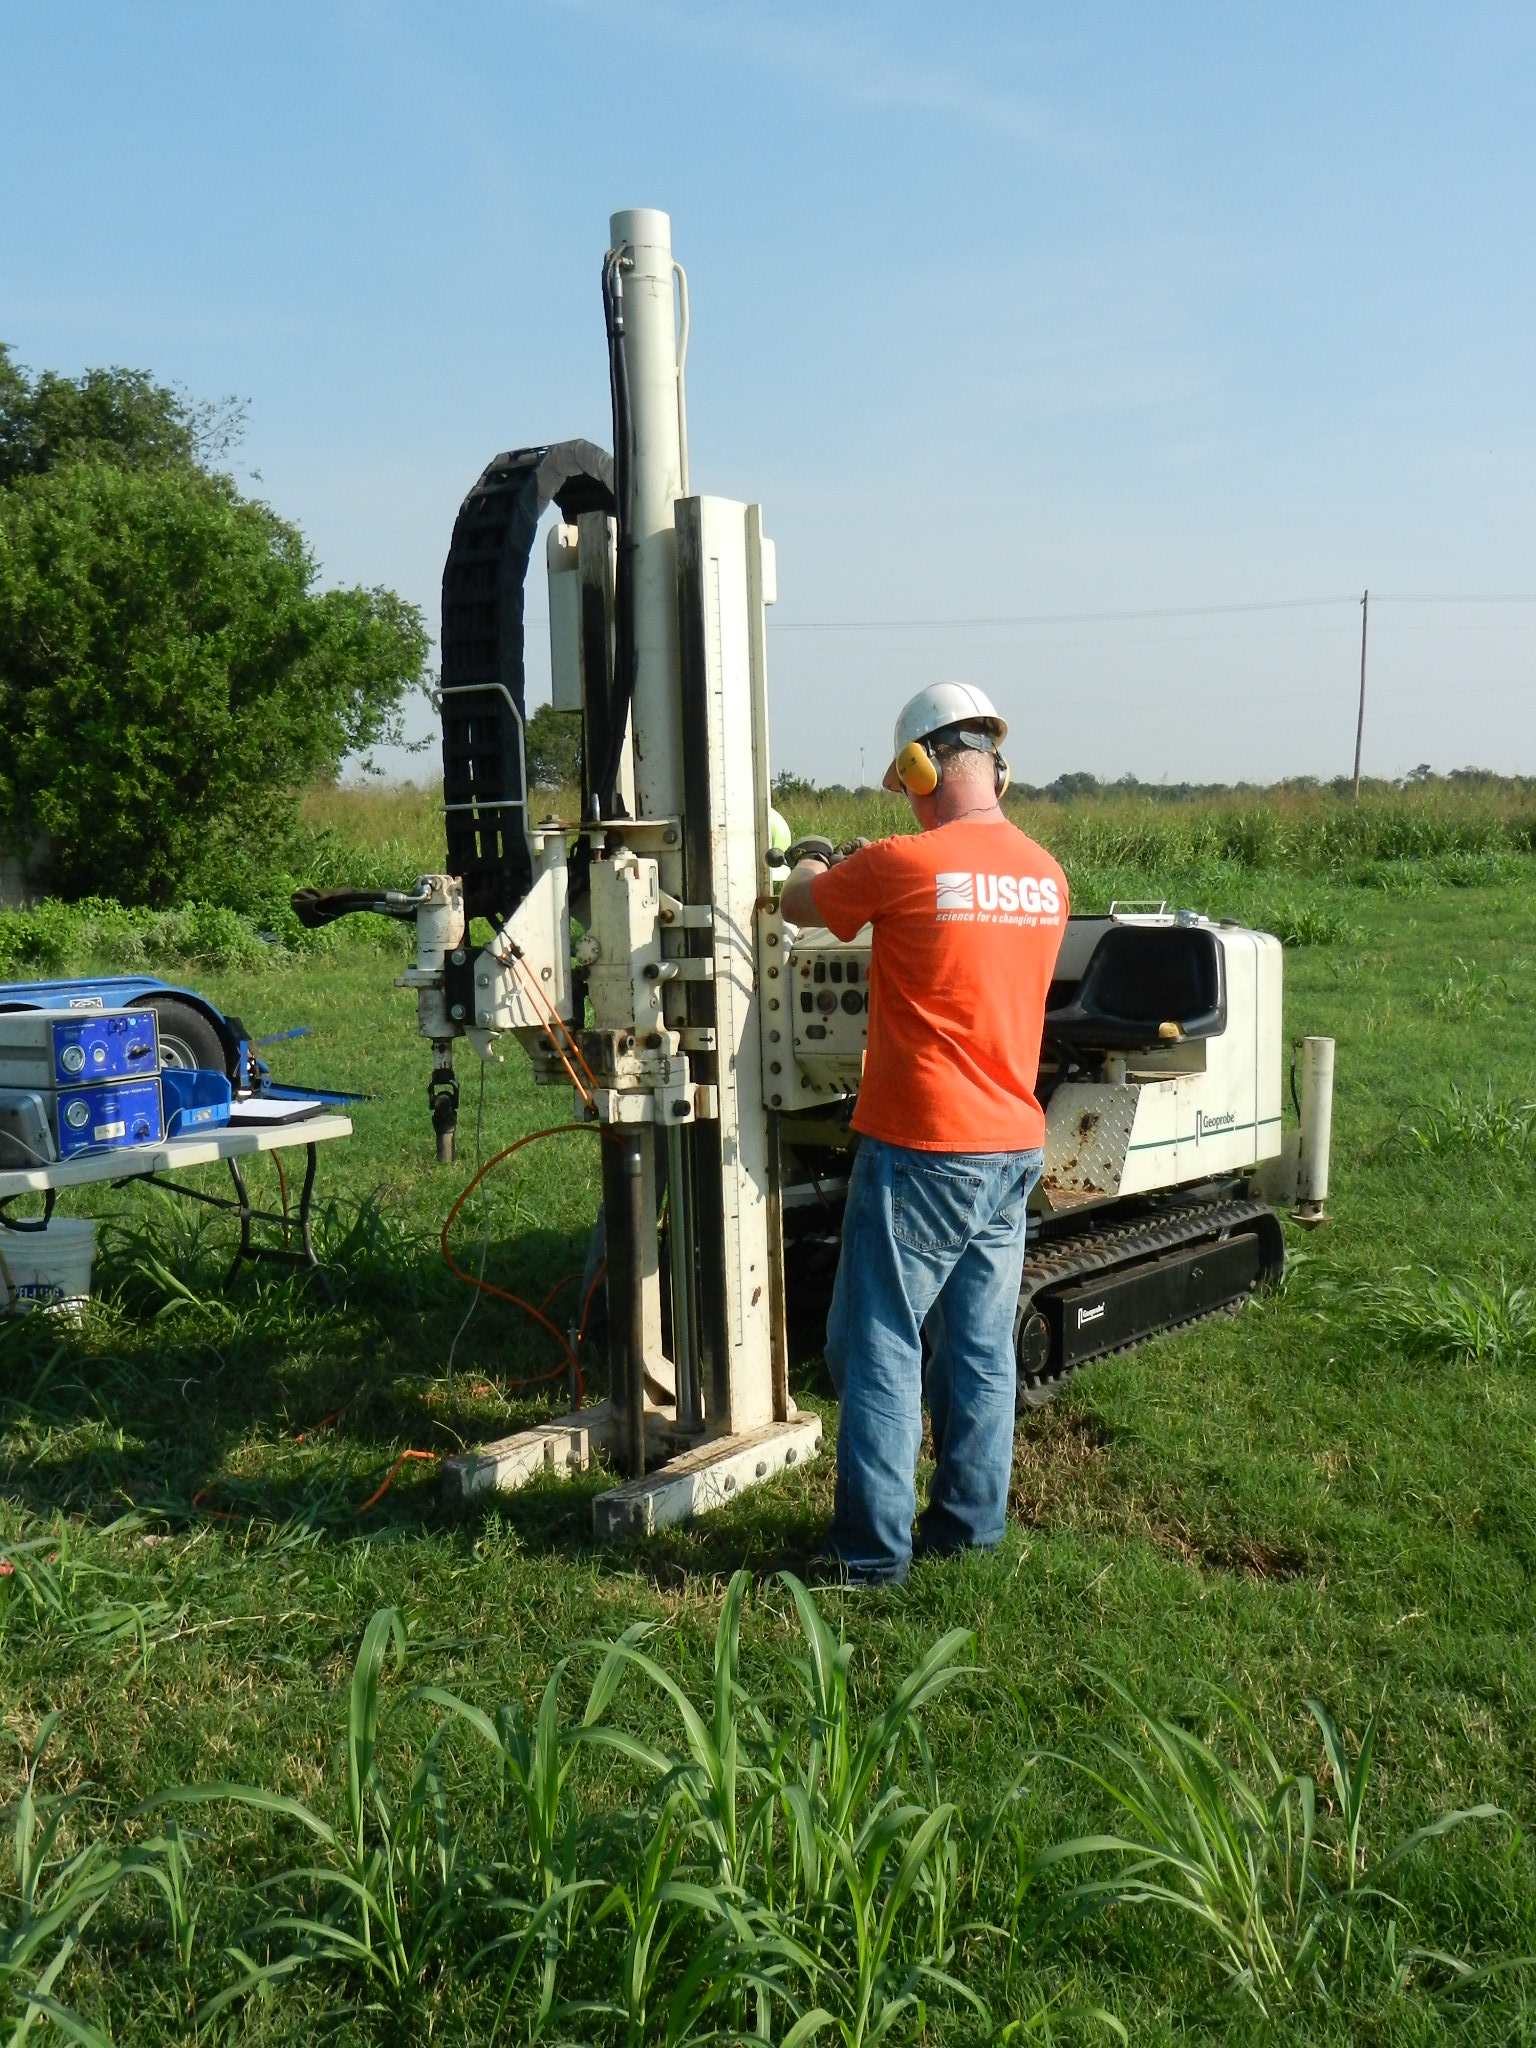  [USGS personnel operate equipment in the field] 